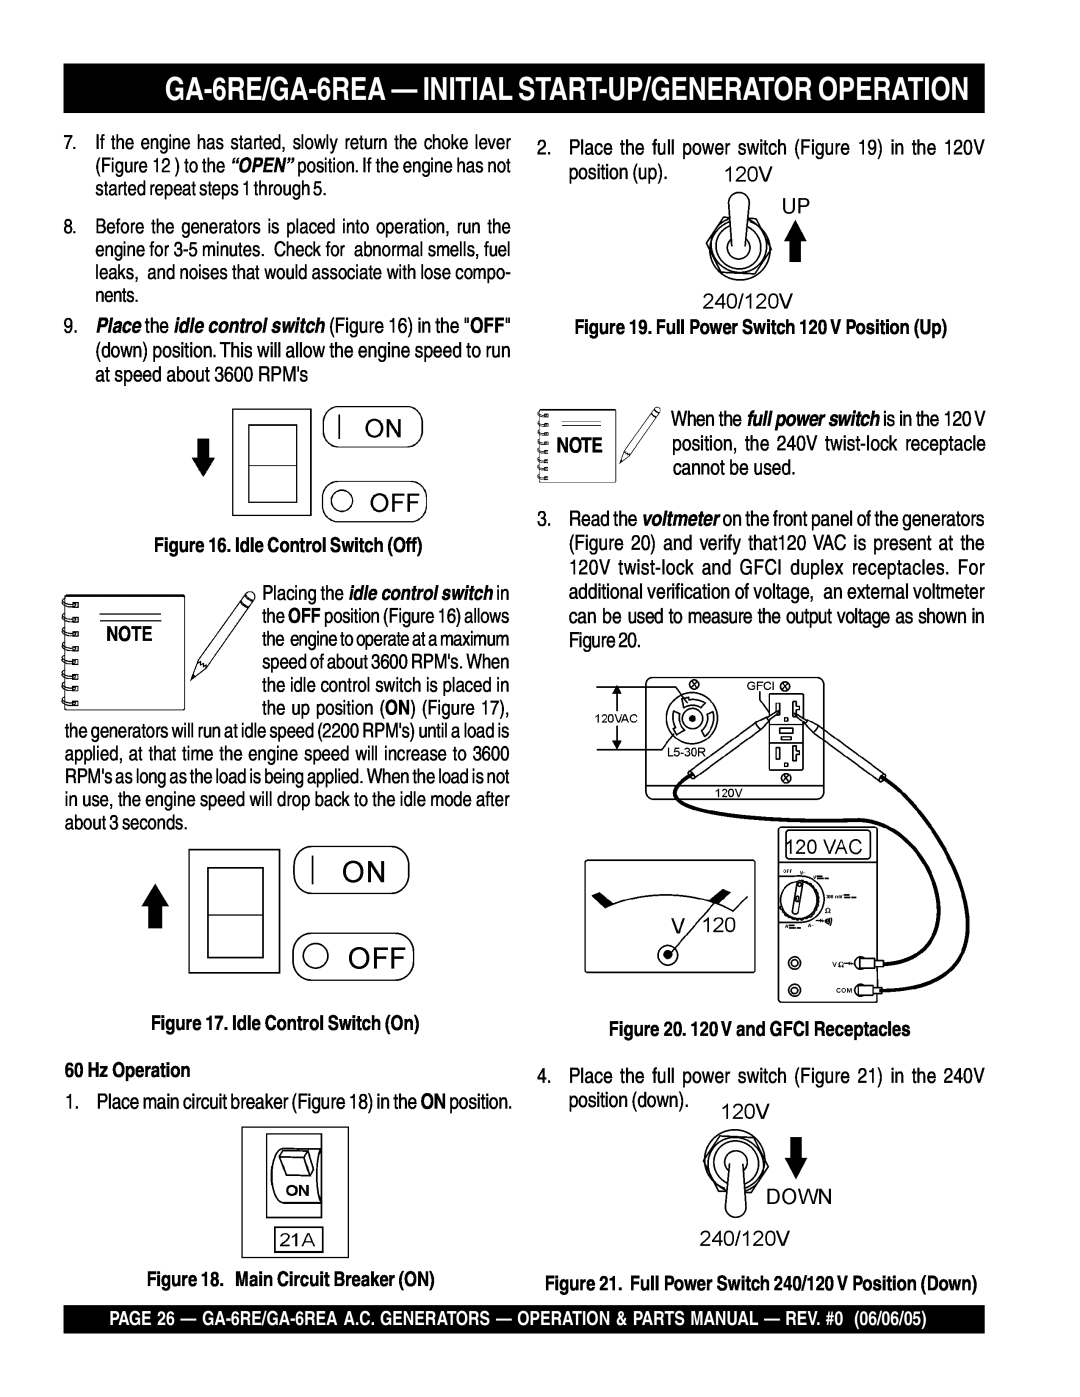 Multiquip GA-6REA manual When the full power switch is in the 